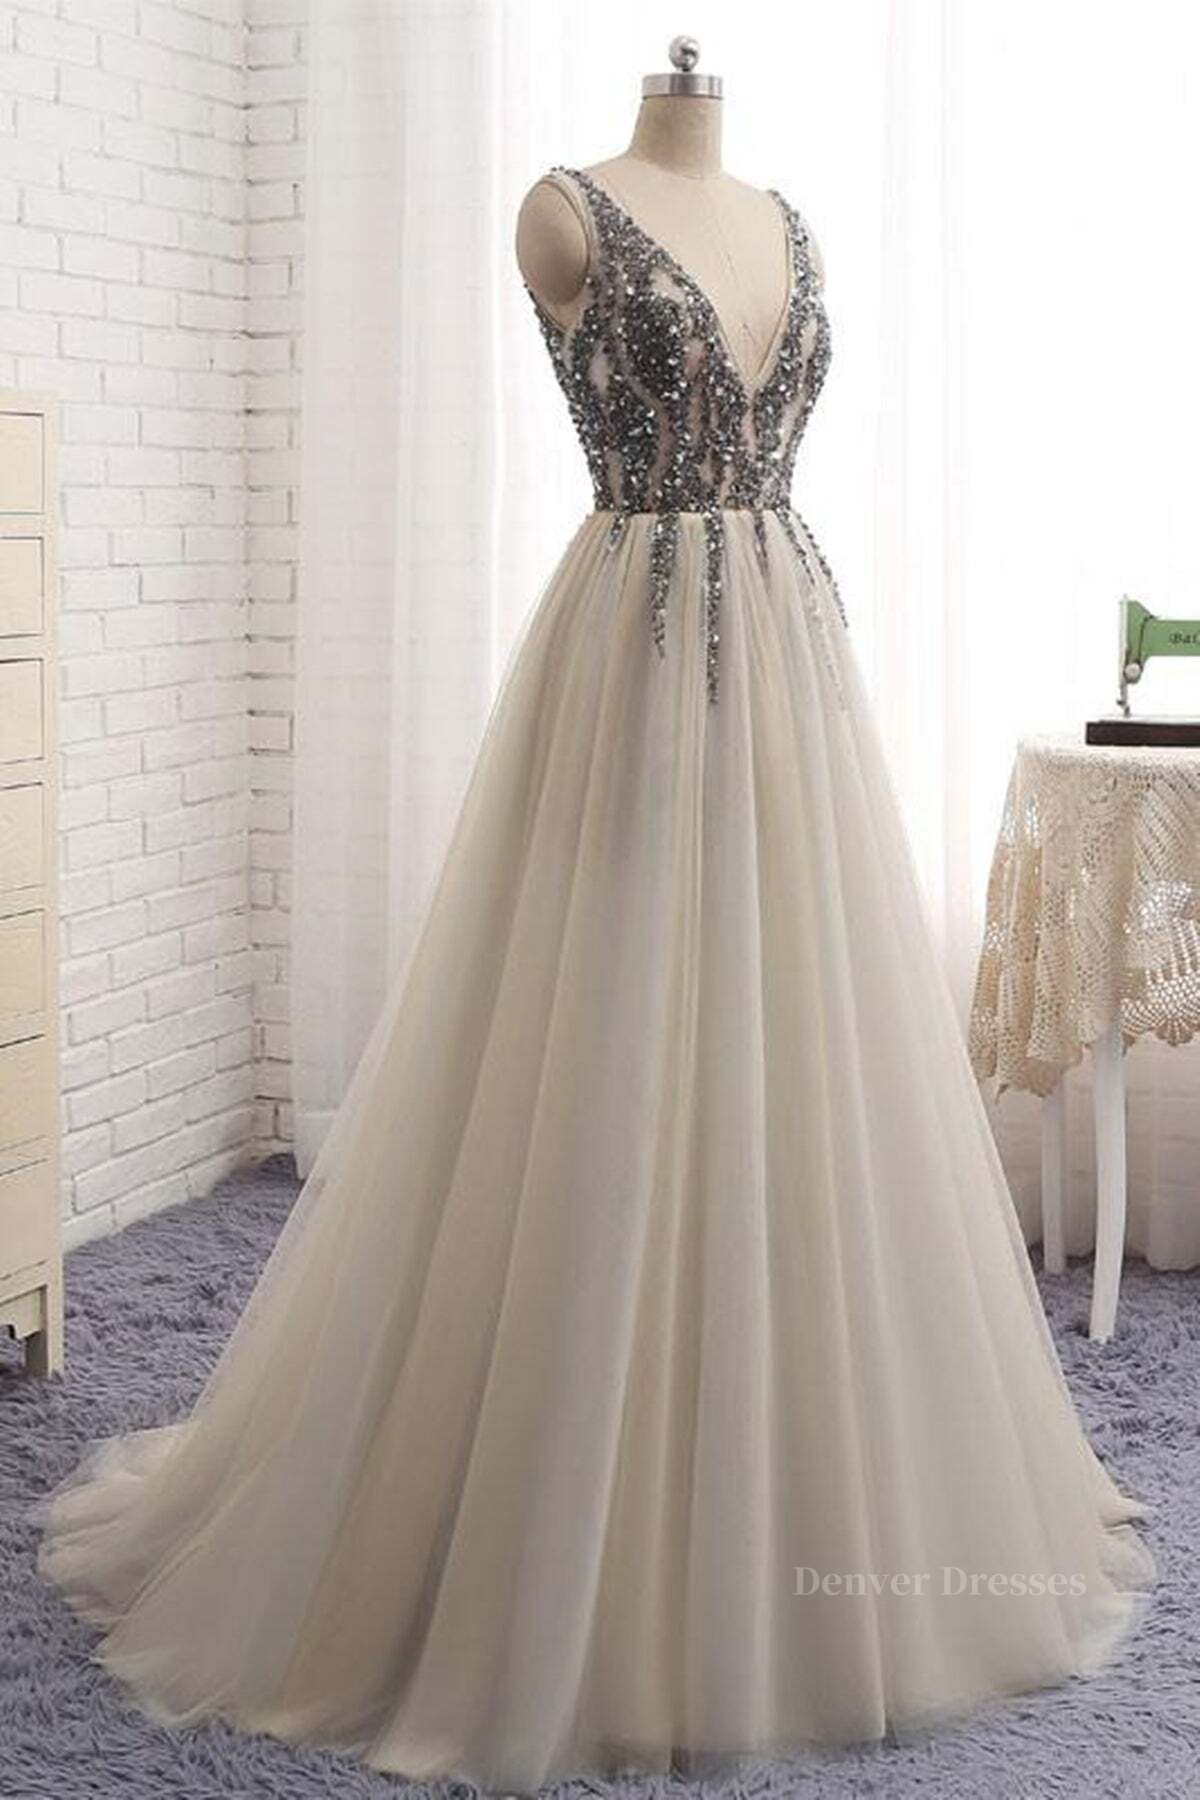 Homecoming Dress Beautiful, A Line V Neck Silver Gray Long Prom Dresses, Silver Grey Beaded Long Formal Evening Dresses